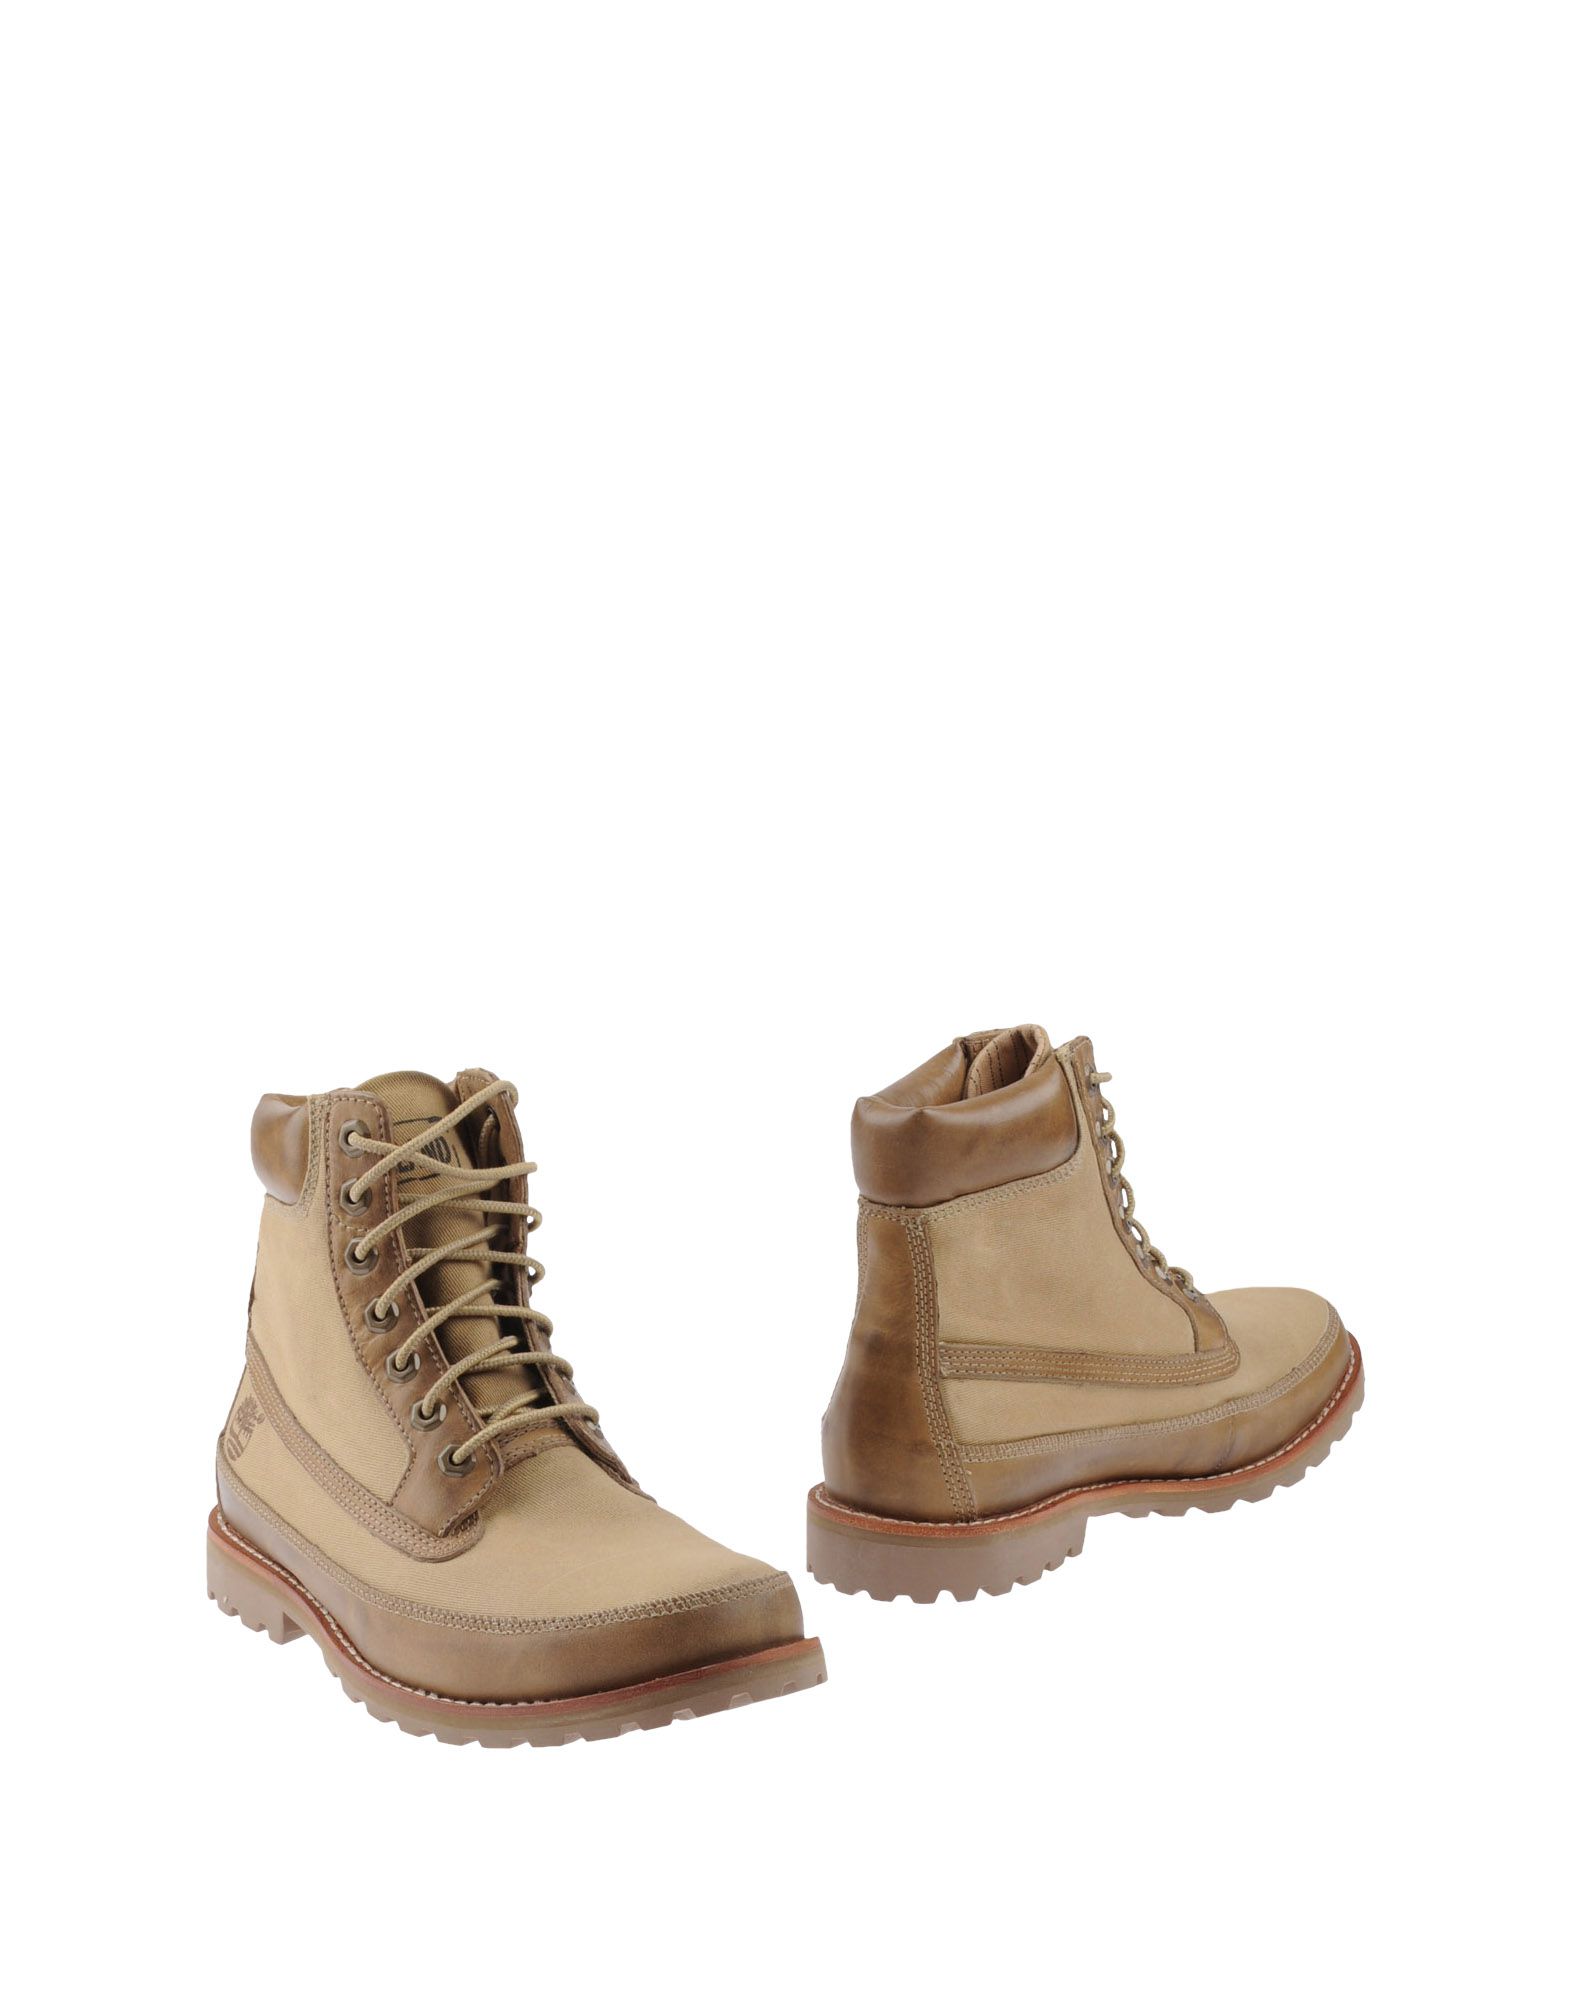 Foto earthkeepers by timberland botas con cordones
 foto 315597